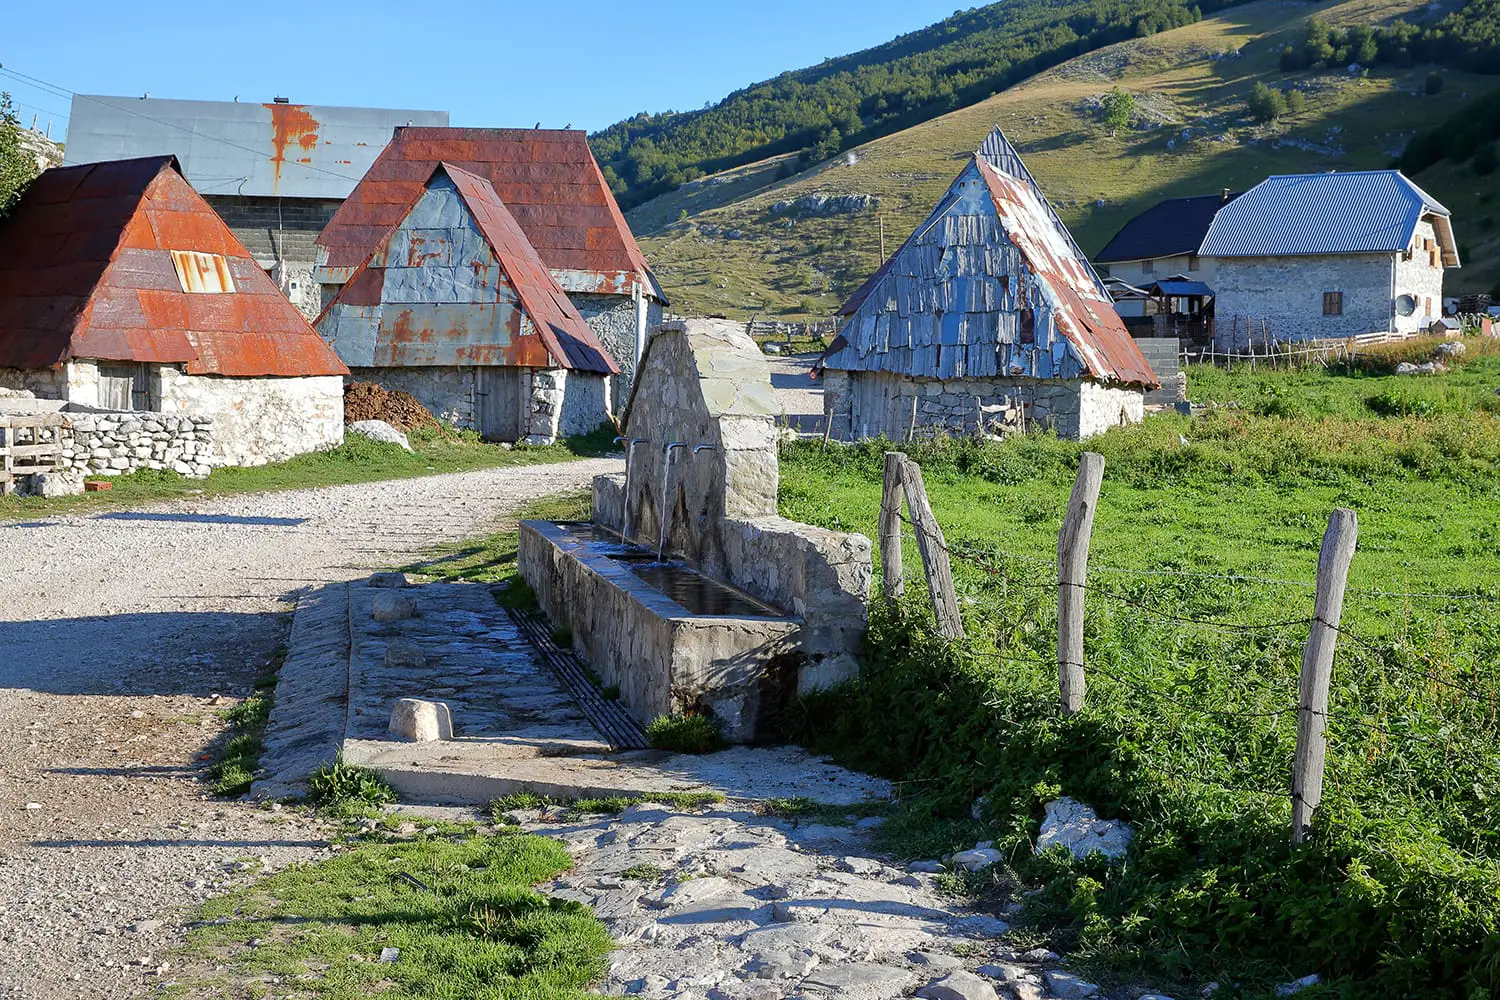 Traditional houses in Lukomir village, with a fountain in the foreground. Lukomir is Bosnia's highest village at 1469 meters and the most remote in the entire country, Bosnia and Herzegovina